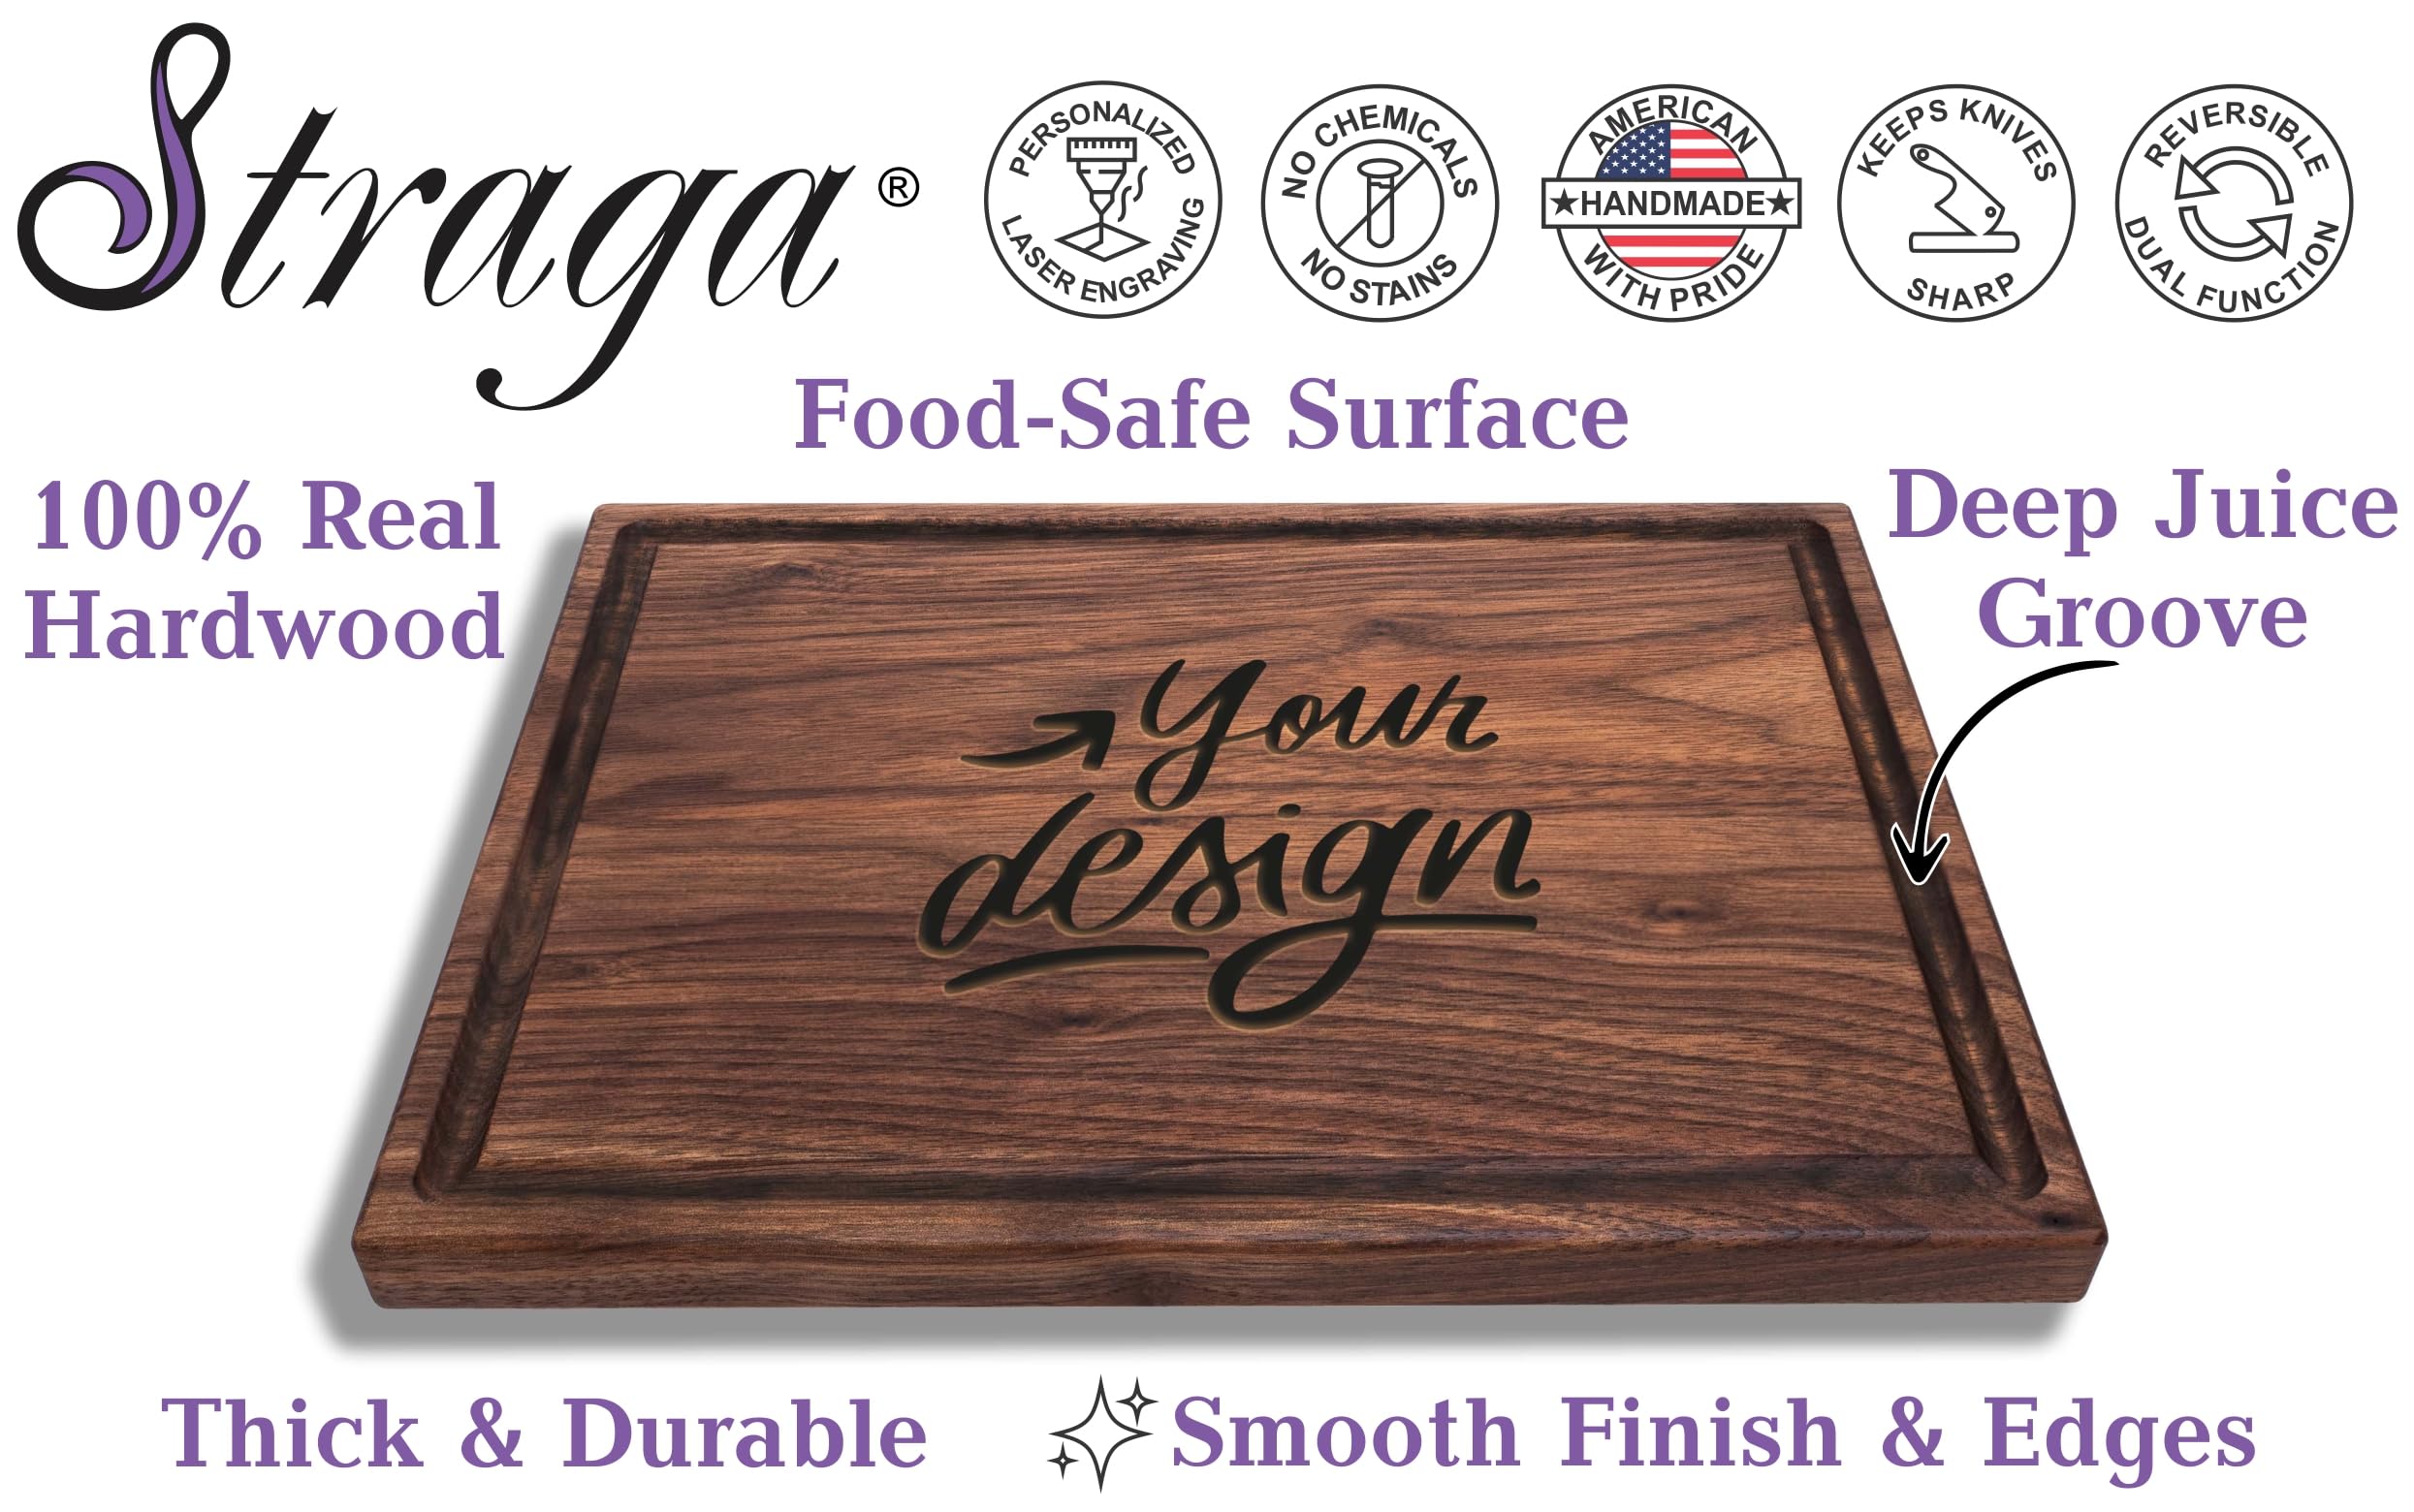 Straga Personalized Cutting Boards | Handmade Wood Engraved Charcuterie | Custom Fun Retirement Gift for Employees, Co-Workers or Friends